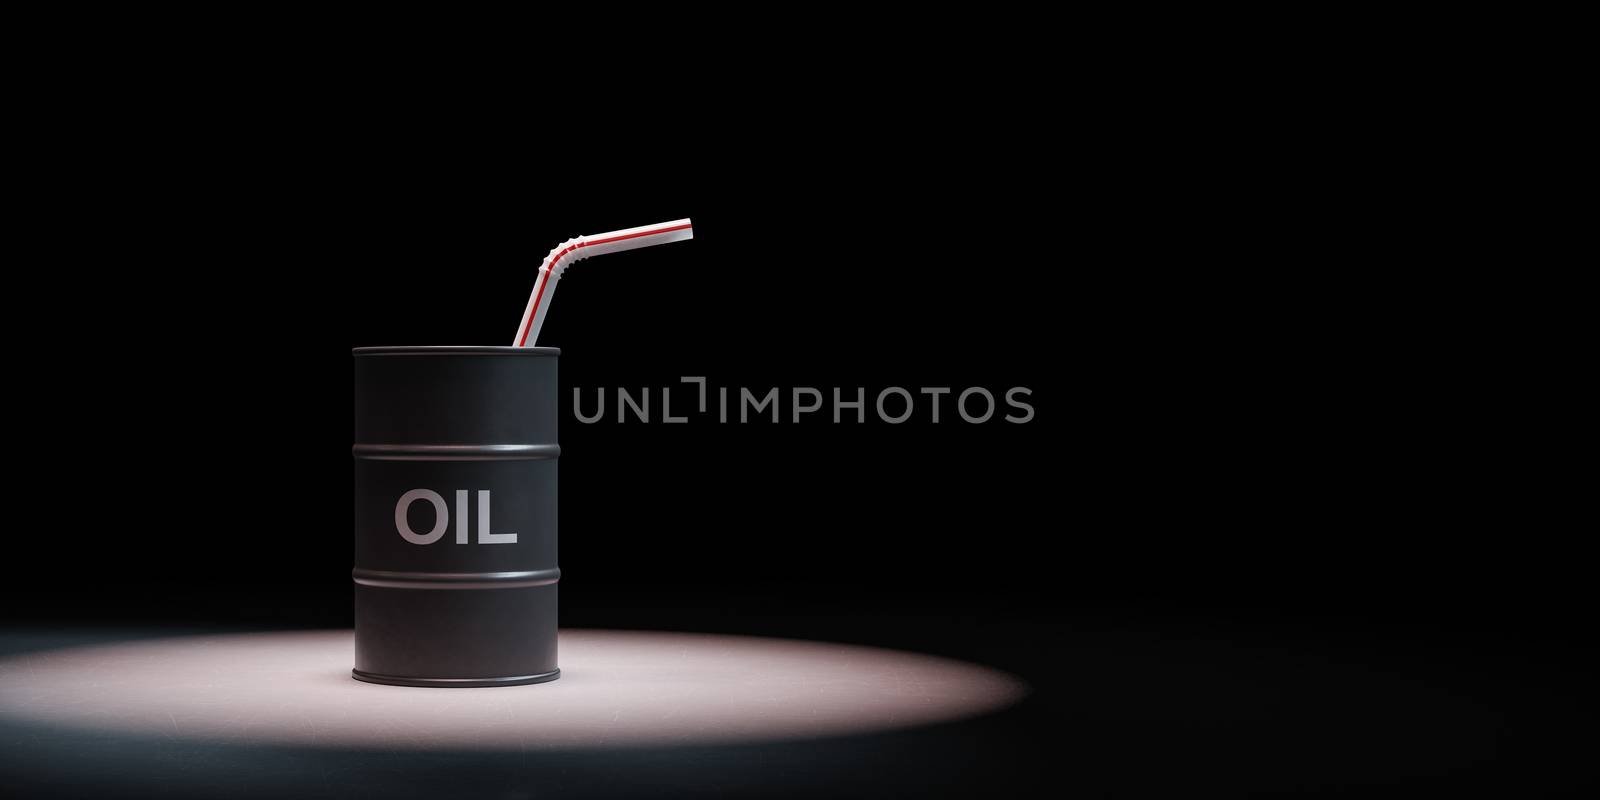 Black Oil Barrel with Drinking Straw Spotlighted on Black Background with Copy Space 3D Illustration